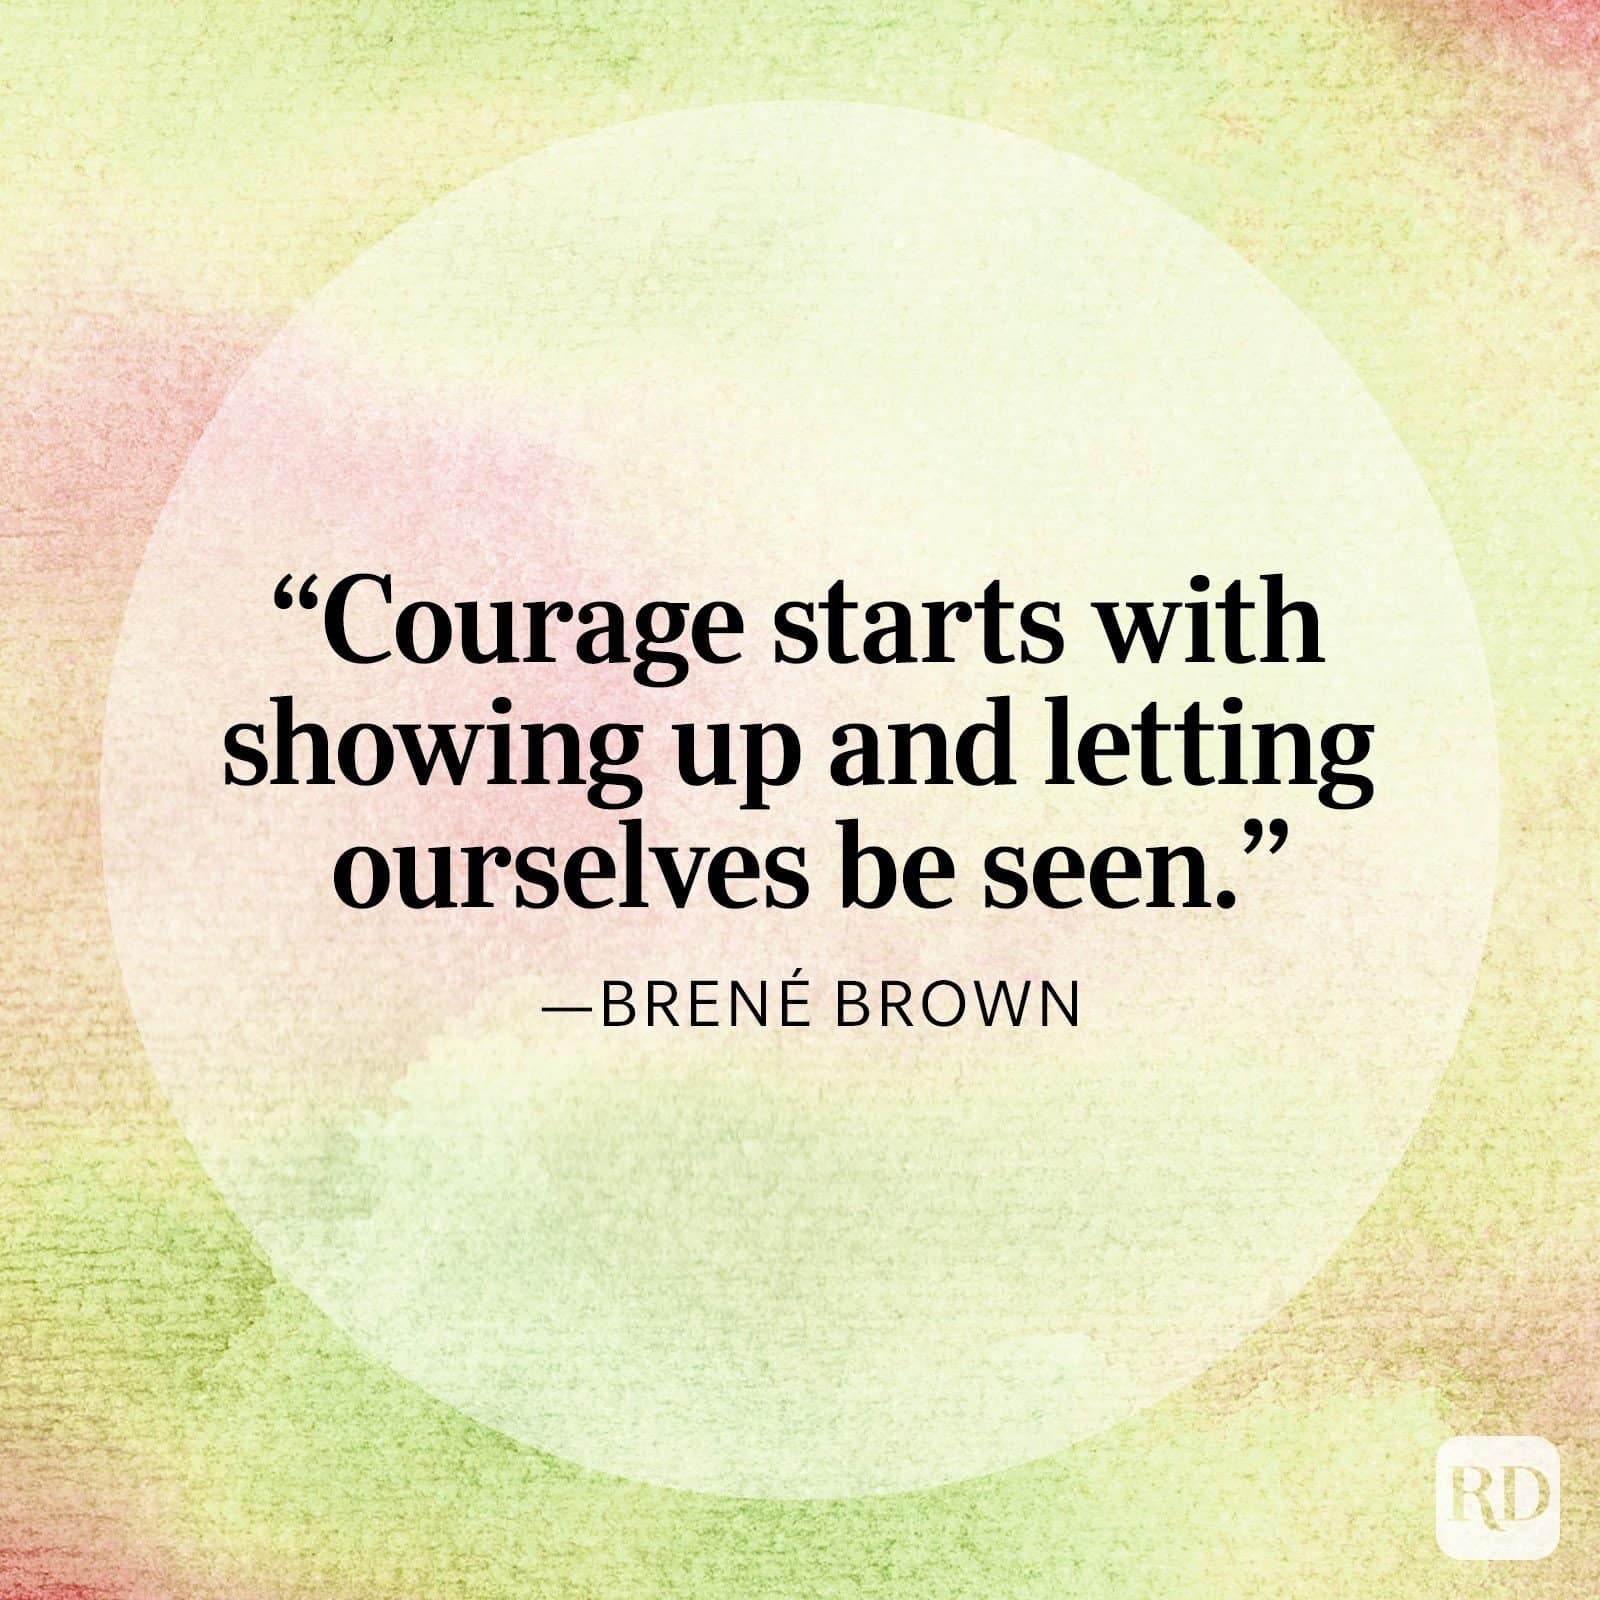 Dare to Lead Quote from Brene Brown